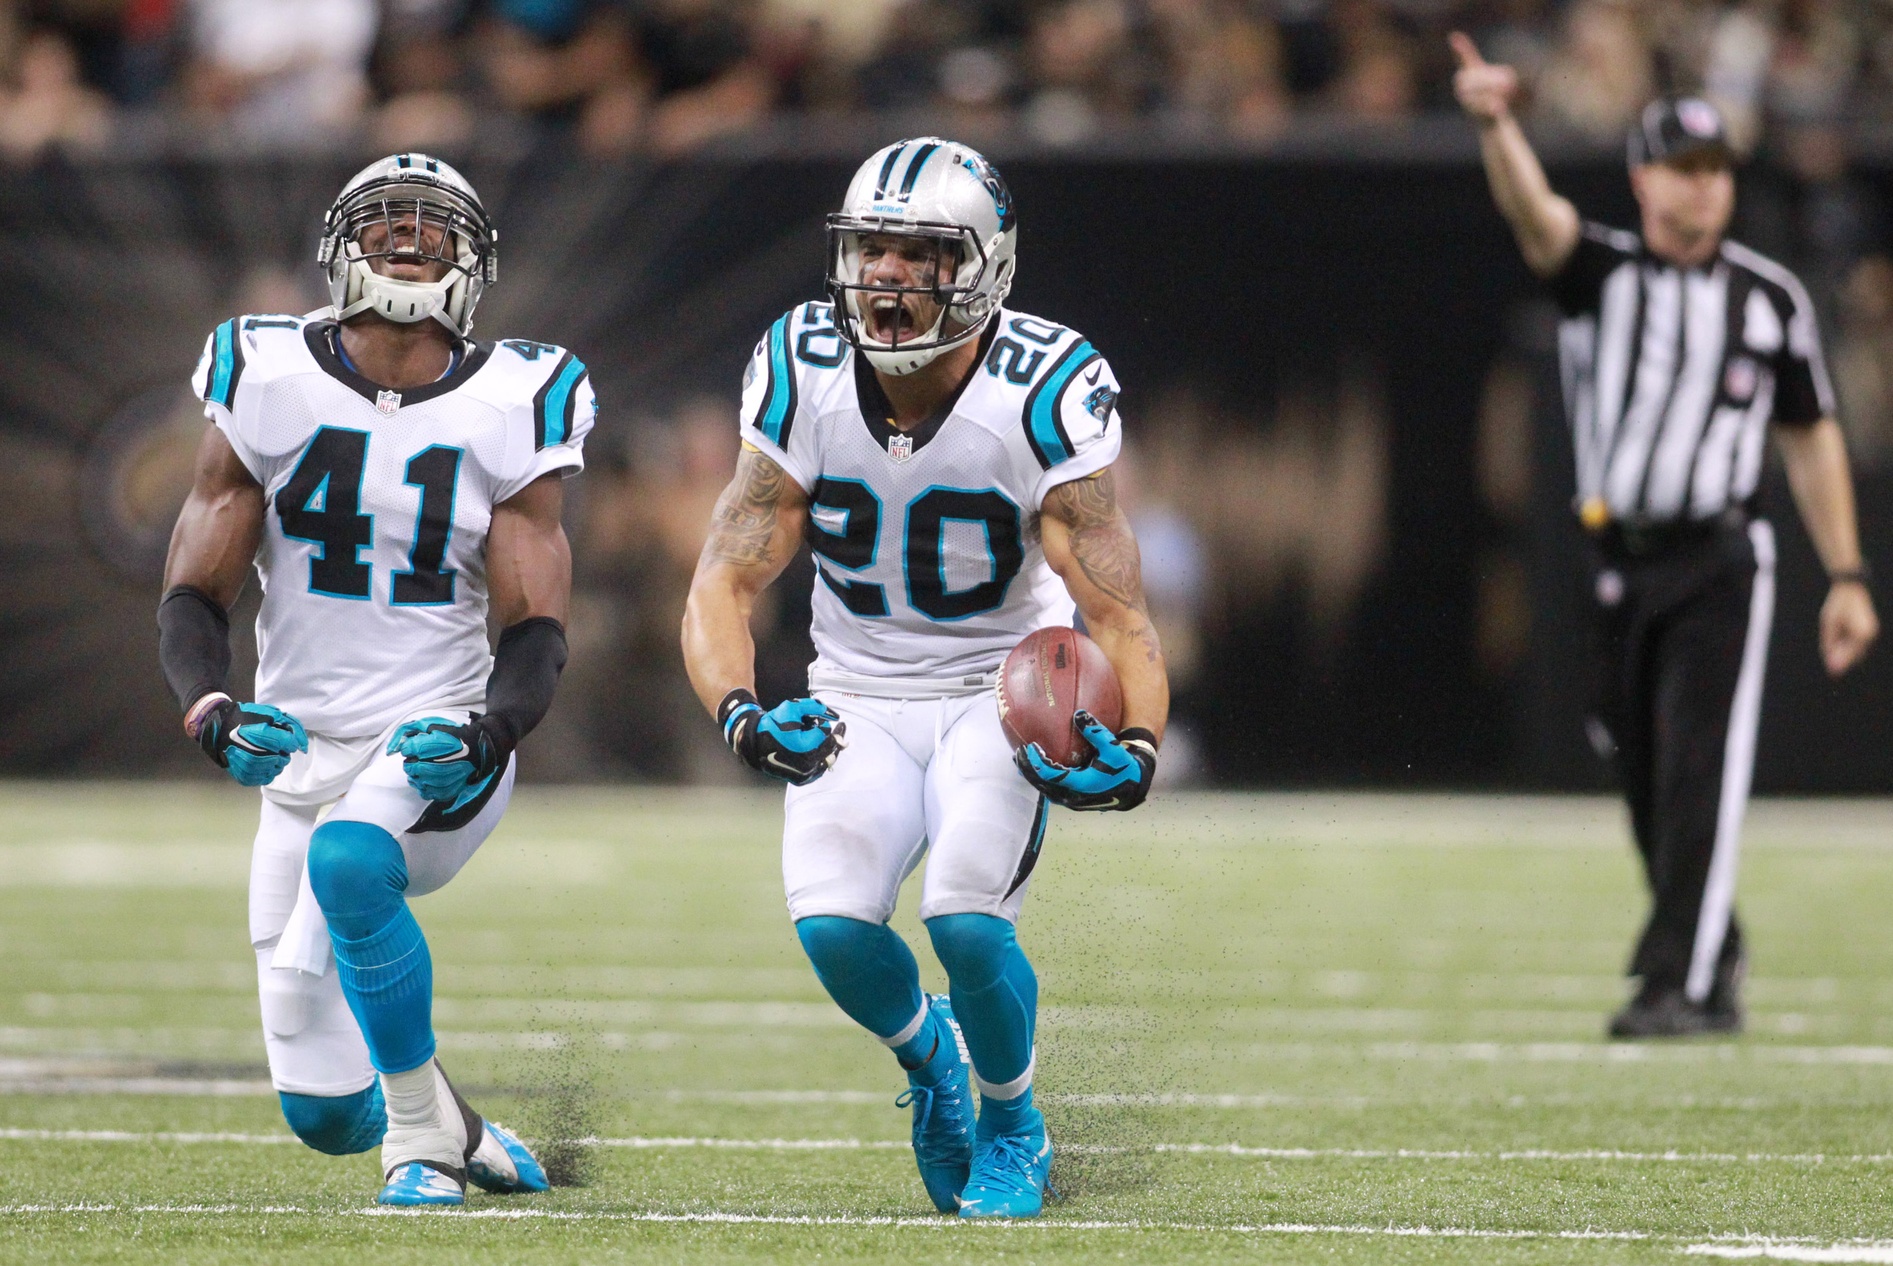 Dec 6, 2015; New Orleans, LA, USA; Carolina Panthers free safety Kurt Coleman (20) and strong safety Roman Harper (41) celebrate a turnover in the second half against the New Orleans Saints at Mercedes-Benz Superdome. The Panthers won 41-38. Mandatory Credit: Crystal LoGiudice-USA TODAY Sports